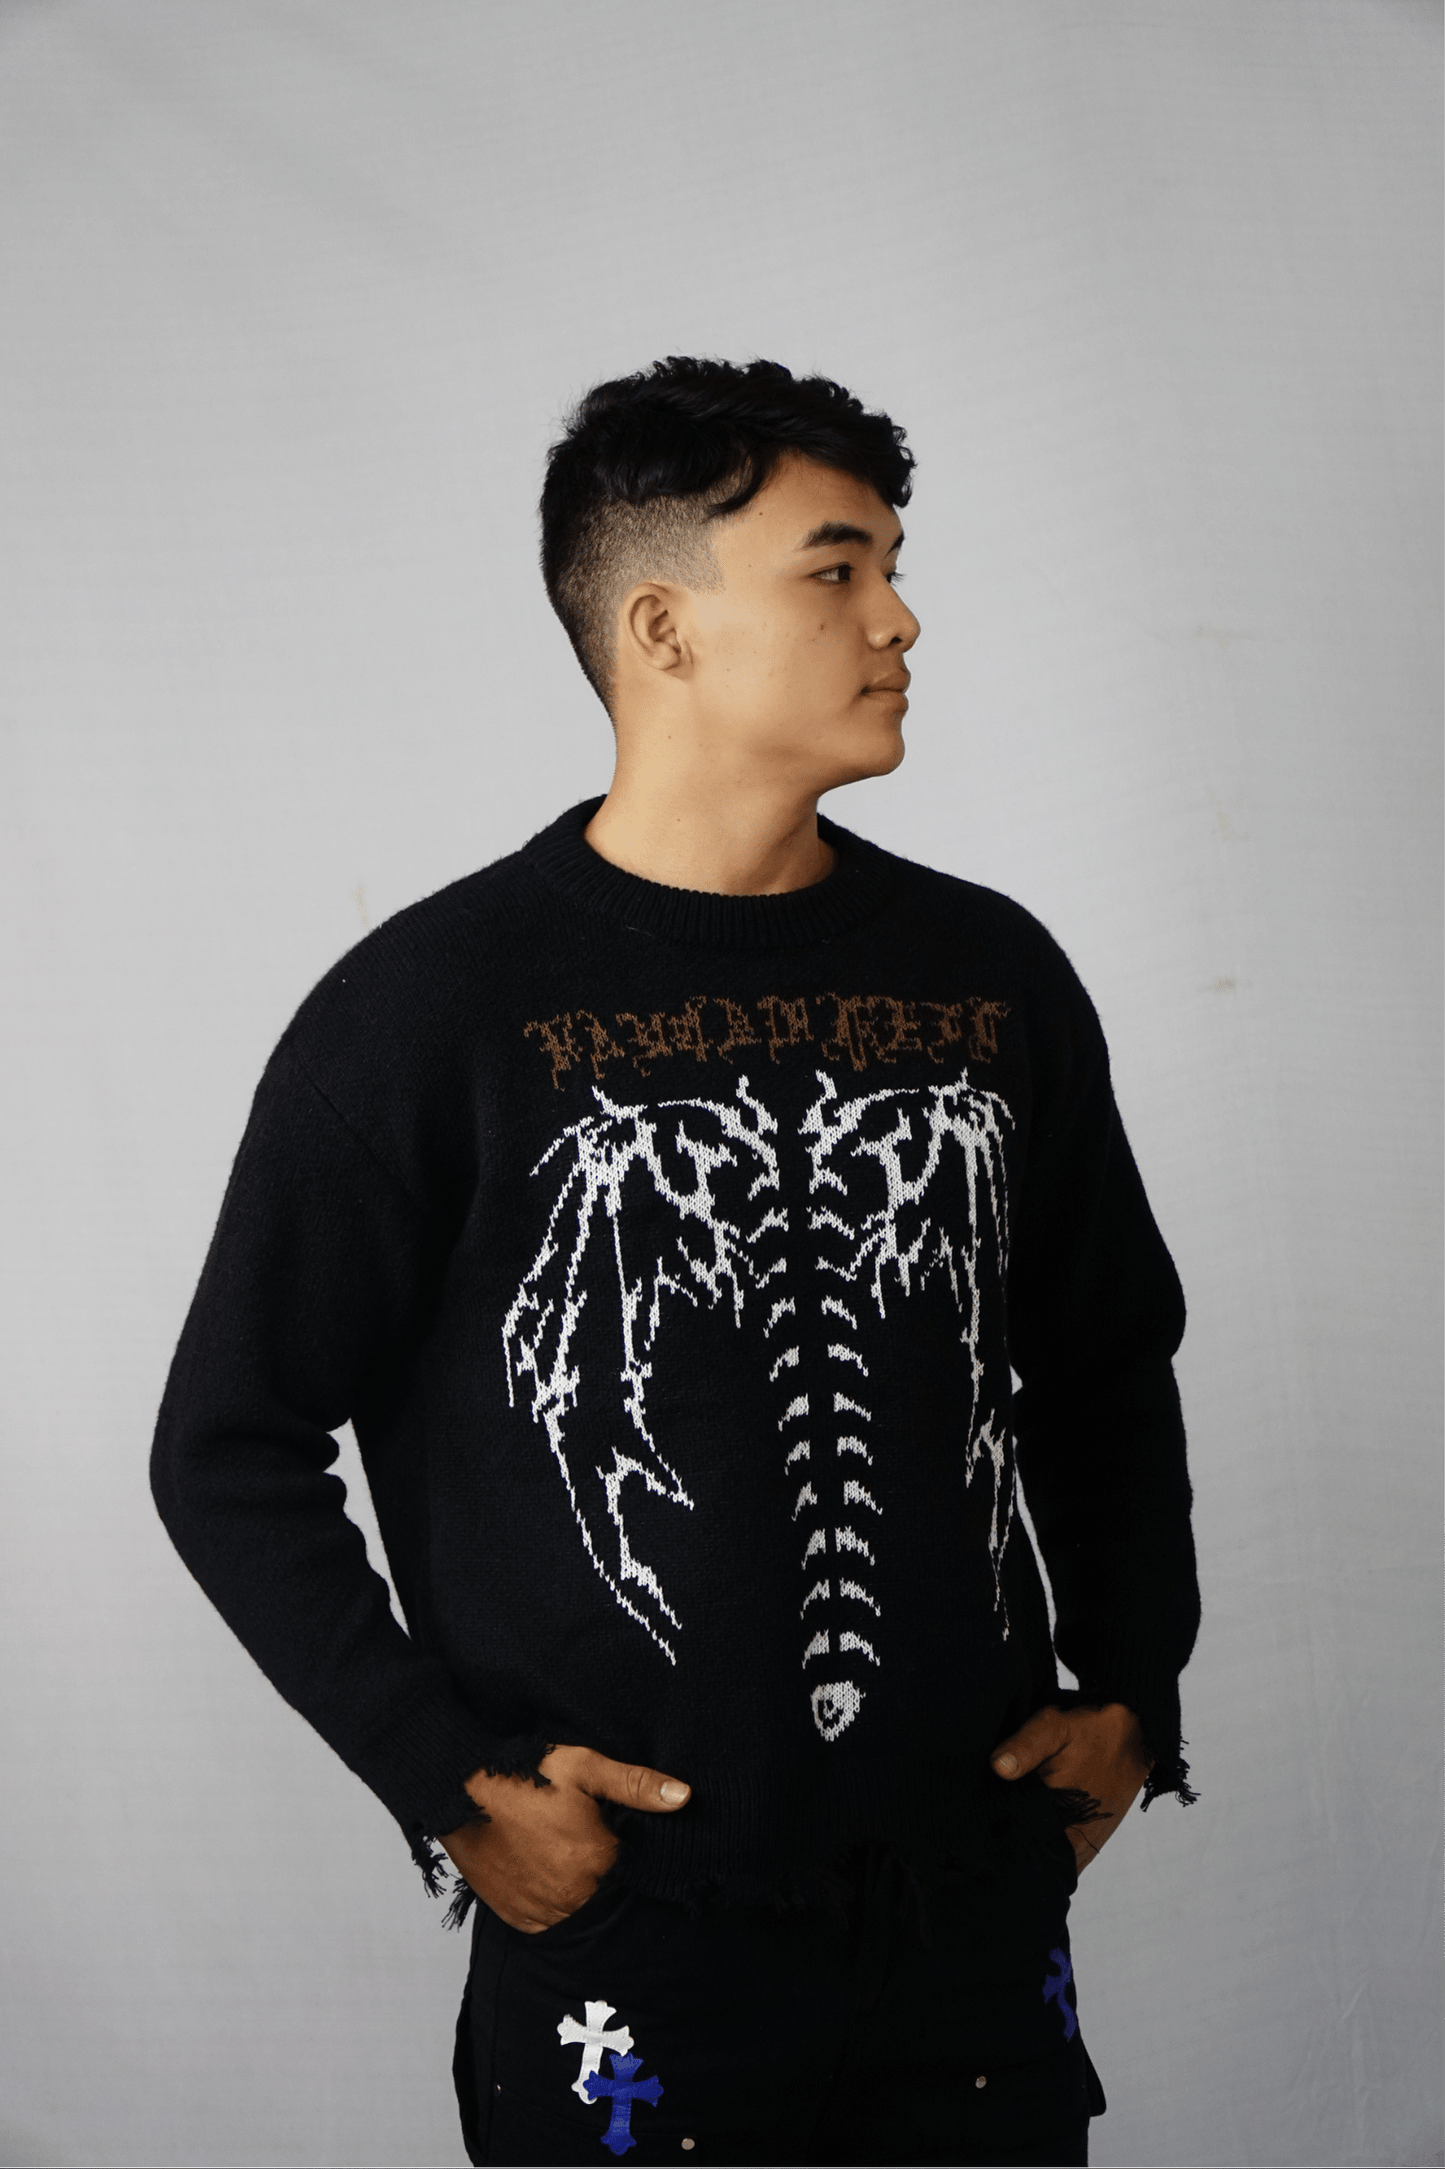 Skeleton Knitted Sweater